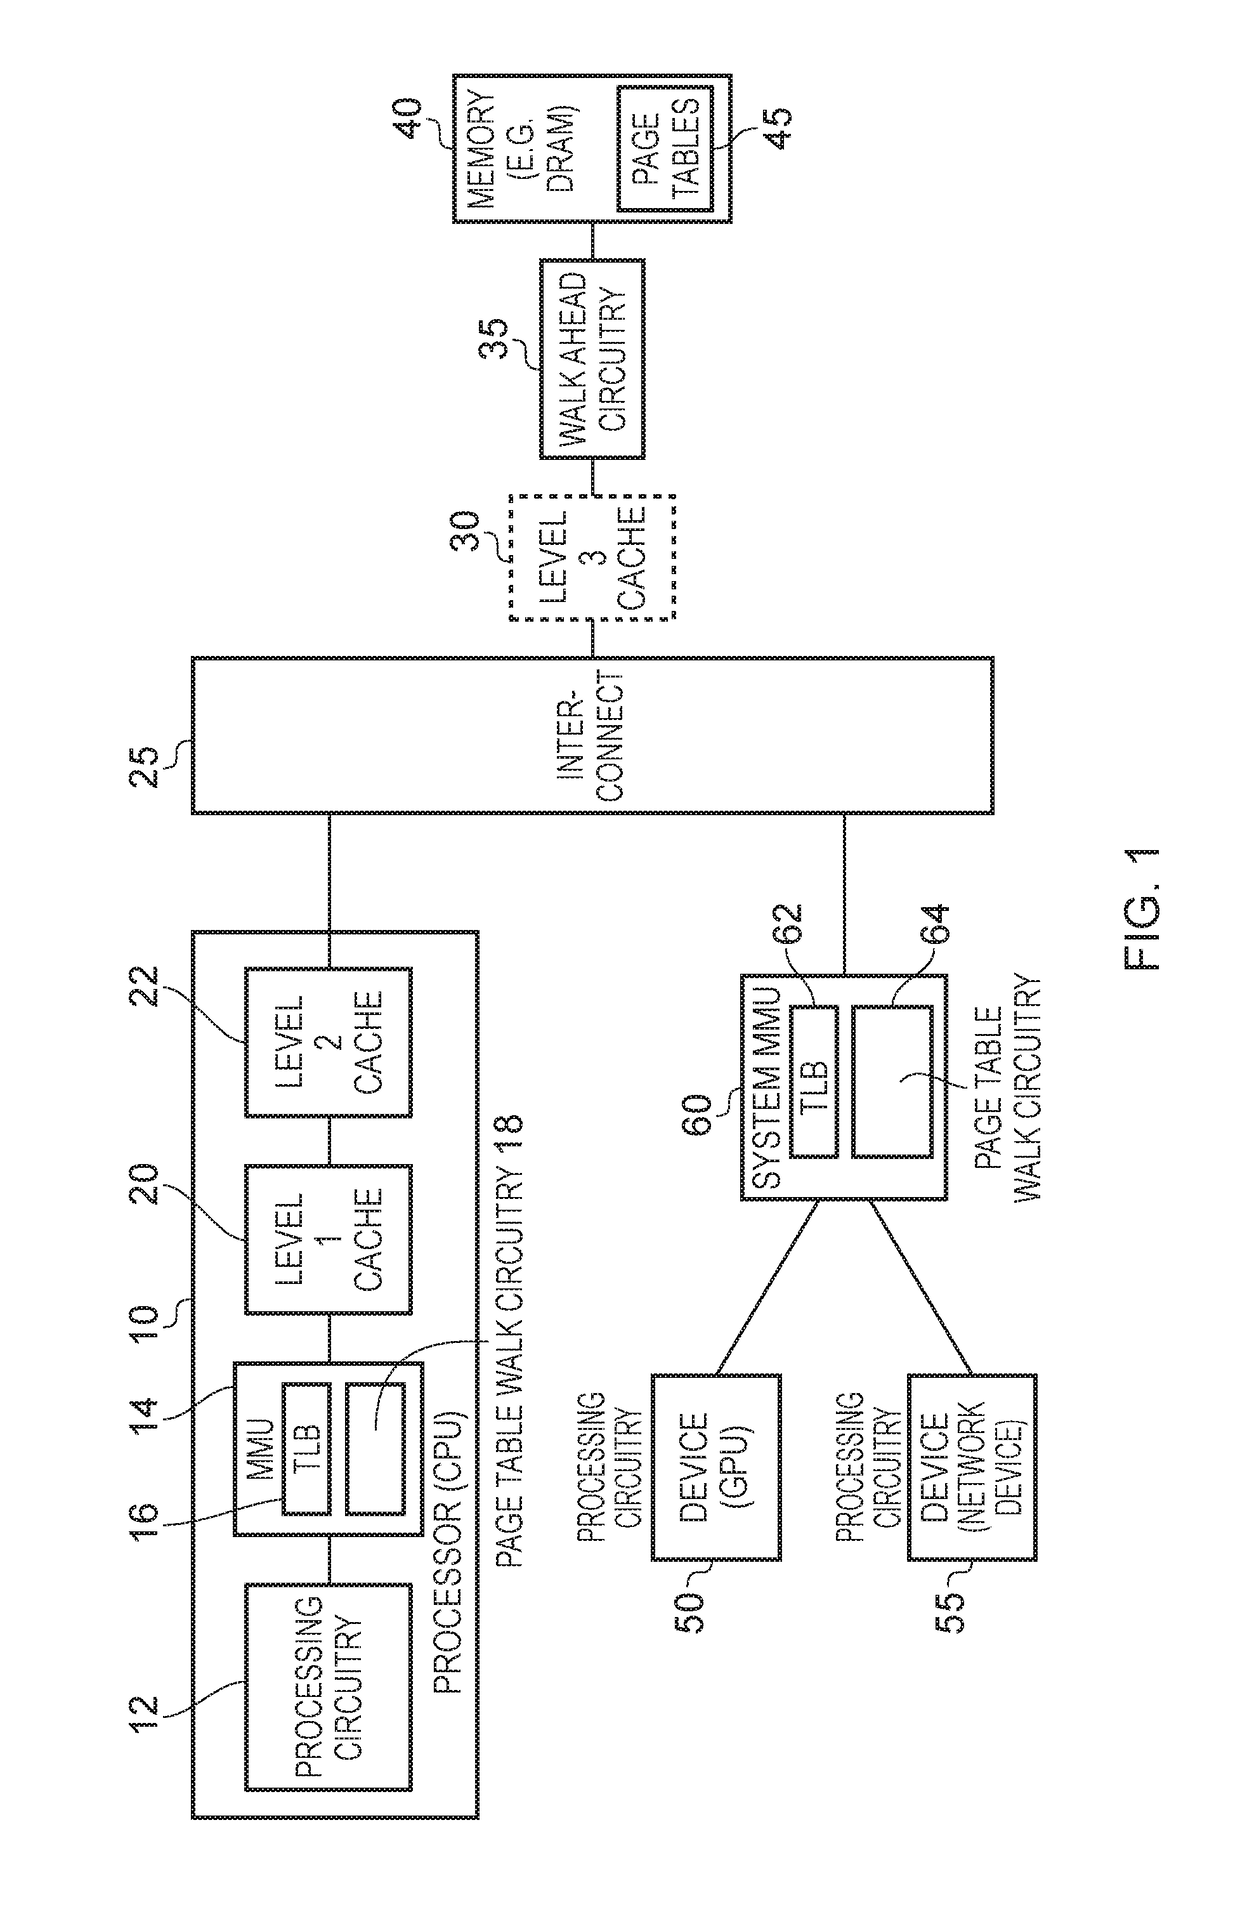 Data processing apparatus, and a method of handling address translation within a data processing apparatus